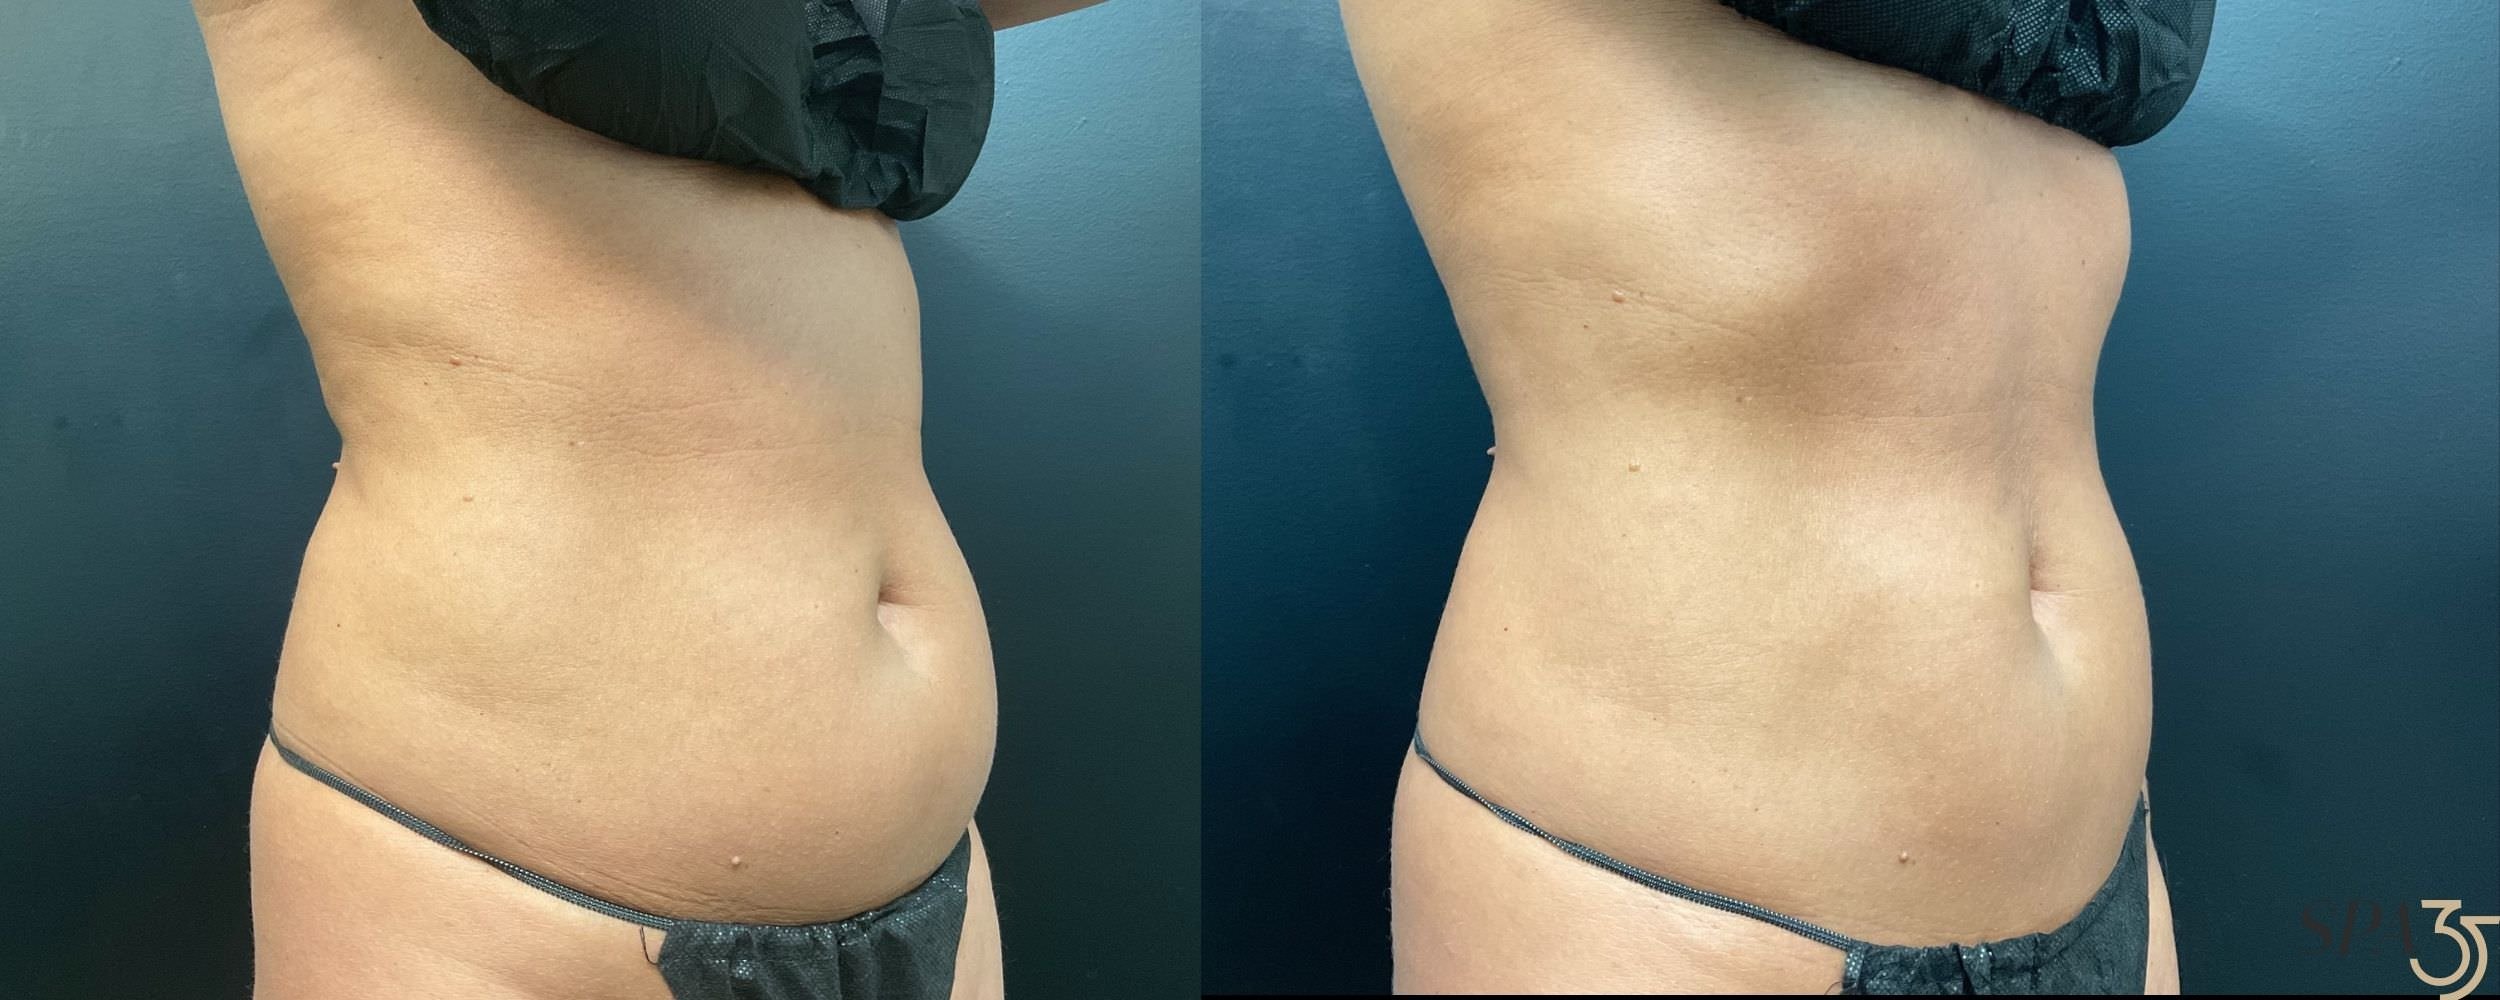 CoolSculpting Fat Removal Abdomen Before and After Photo - Spa 35.jpg